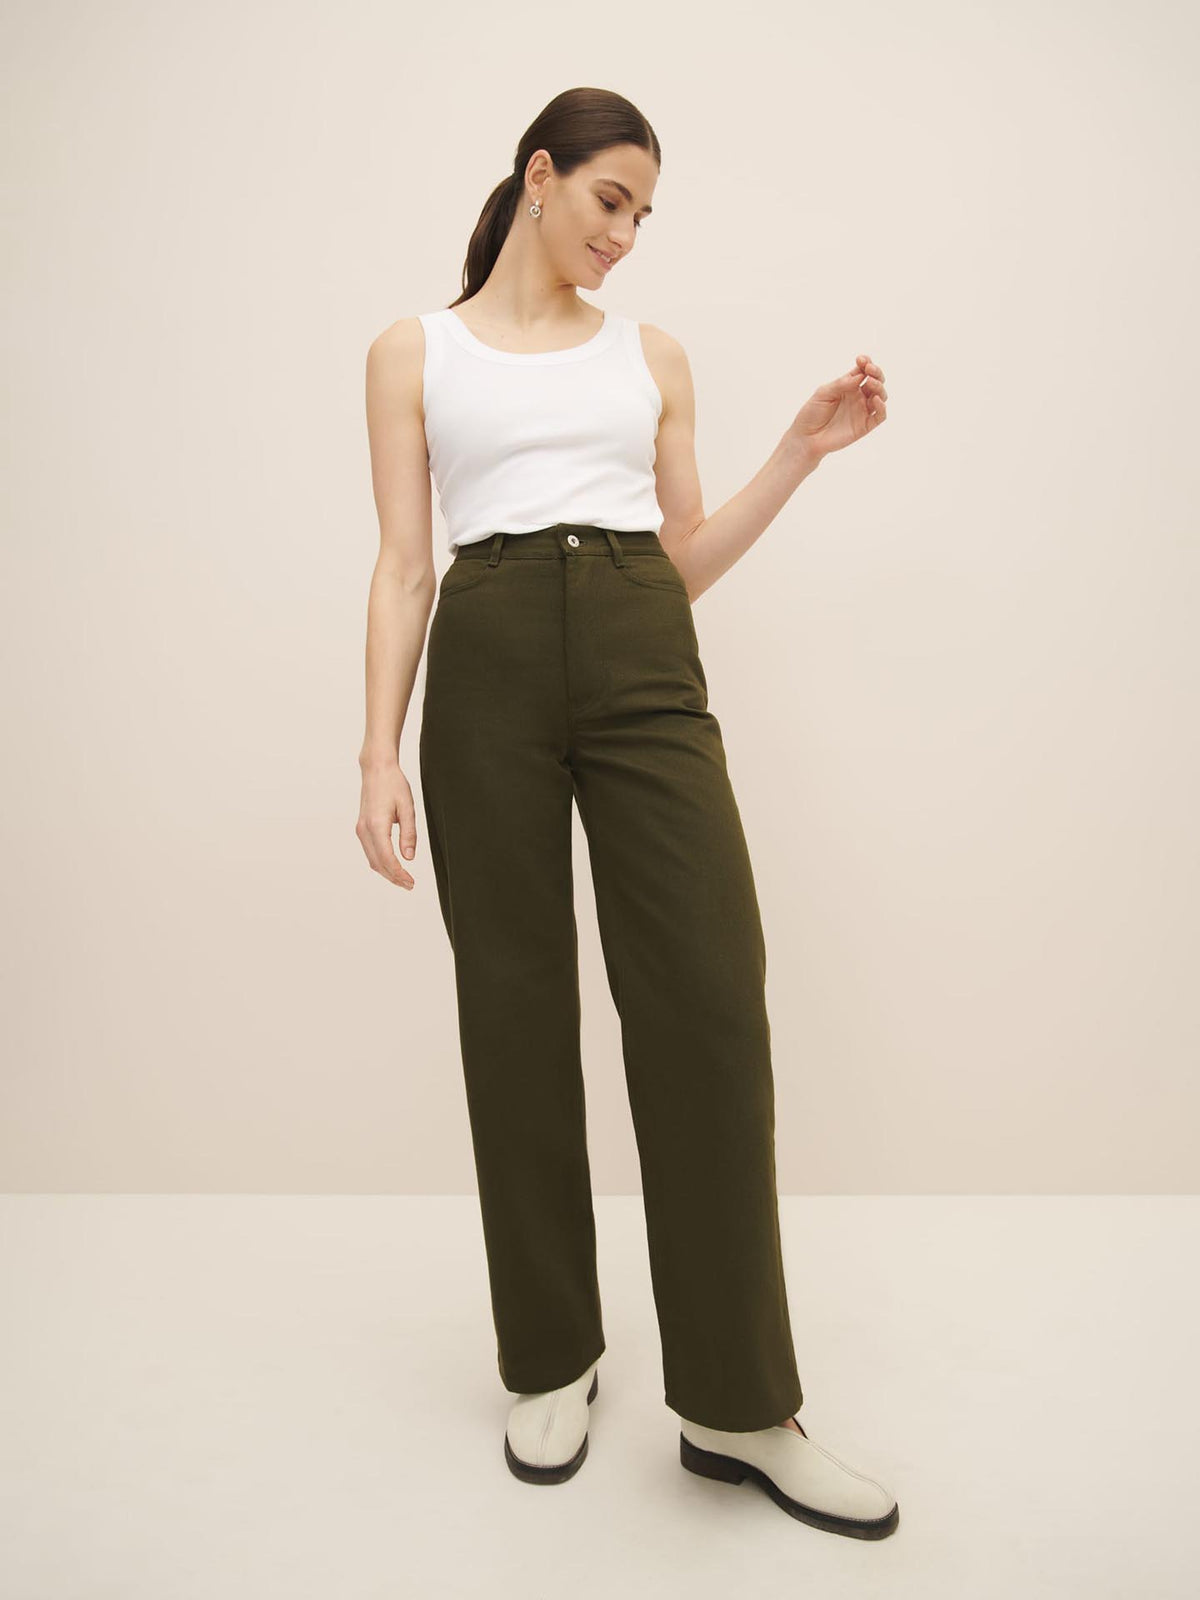 A woman wearing a white tank top and green wide leg pants made of organic cotton.